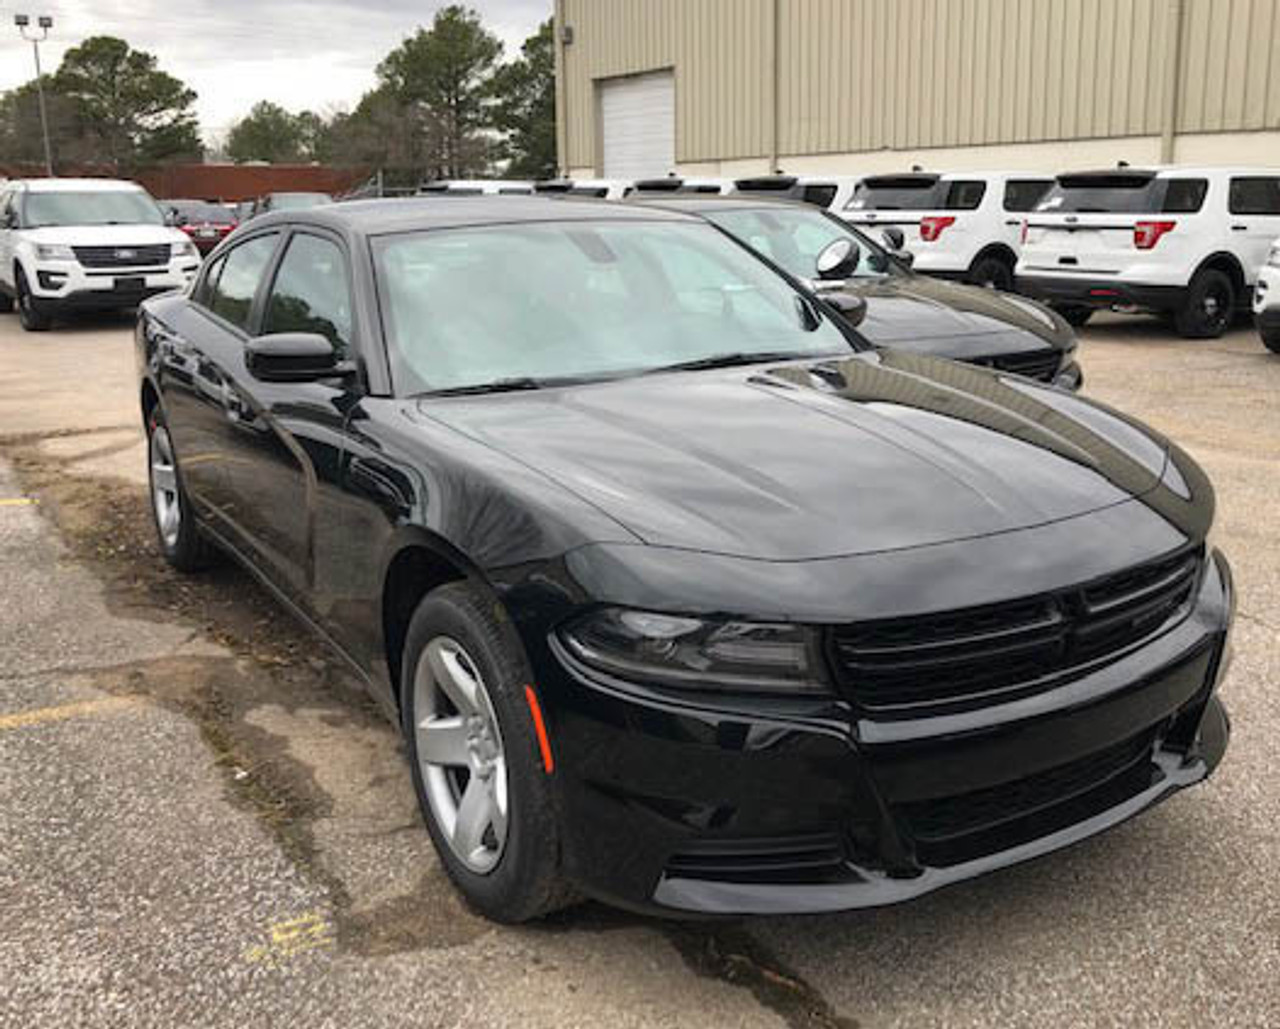 New 2023 Black Dodge Charger PPV V8 RWD ready to be built as an Unmarked Patrol Package Police Pursuit Car (Emergency Lighting, Siren, Controller,  Console, etc.), BCUM3, + Delivery